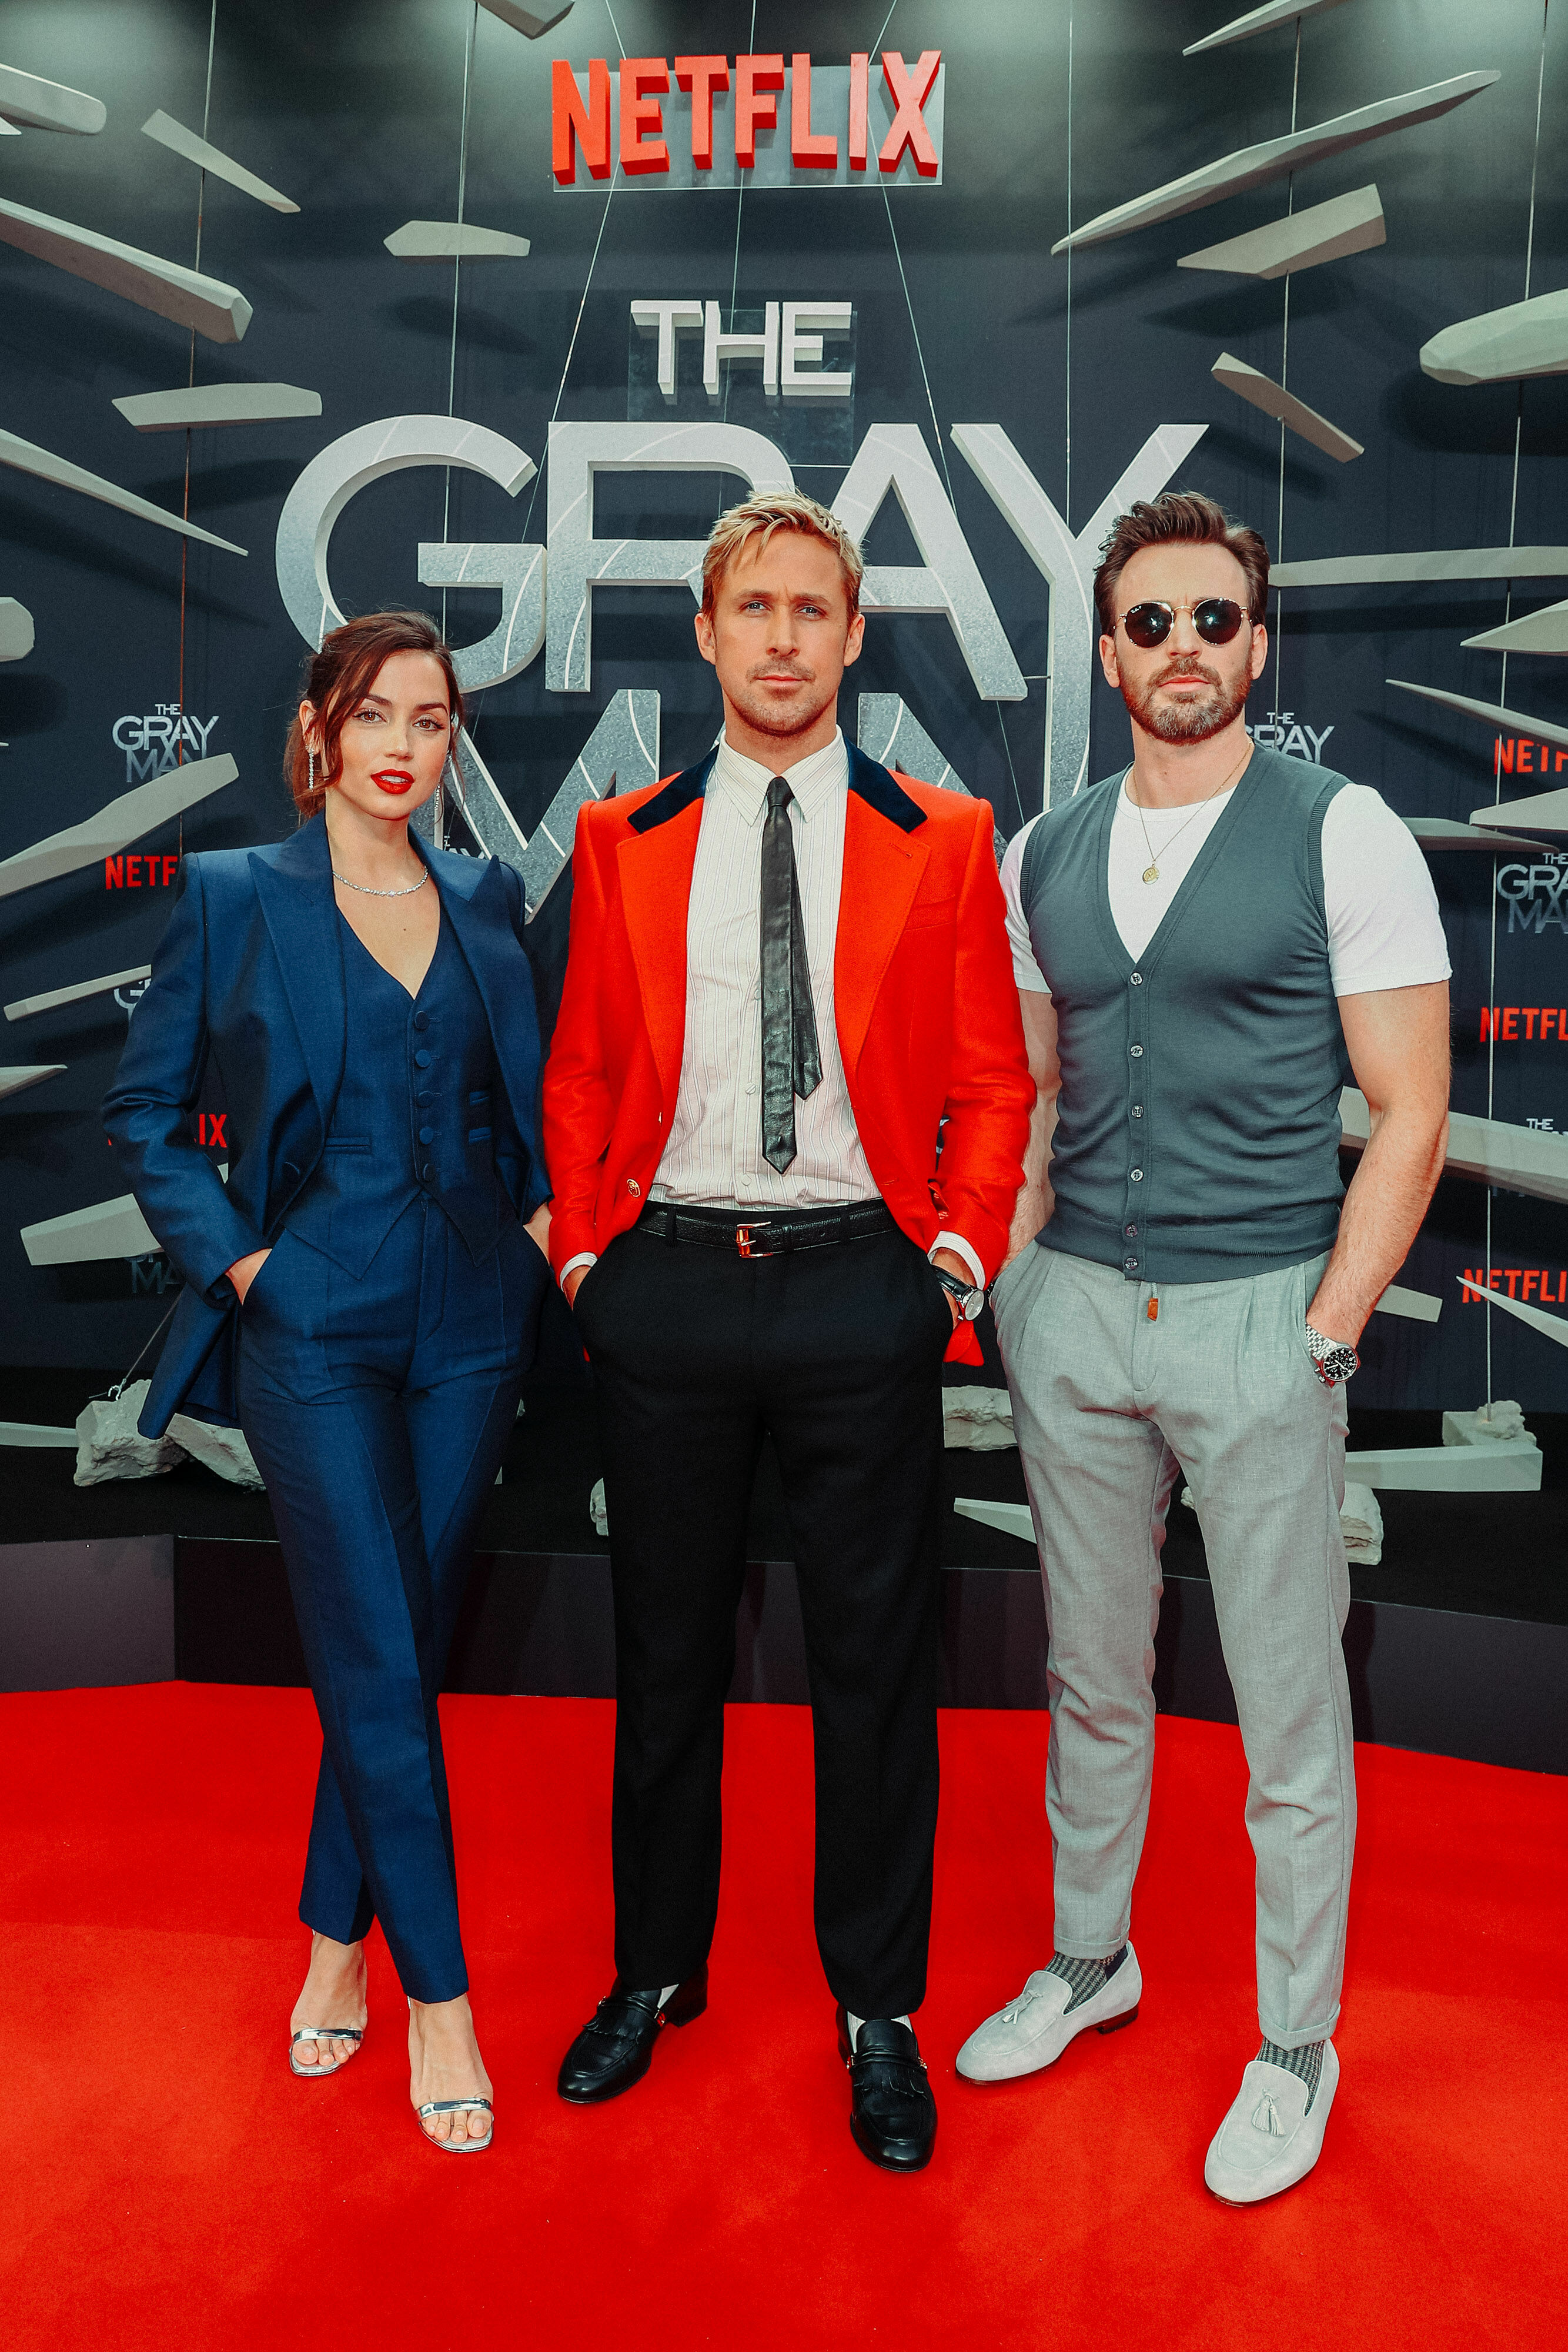 Audi Teams up with Netflix on “The Gray Man” as the Official Automotive Brand featured in the Film